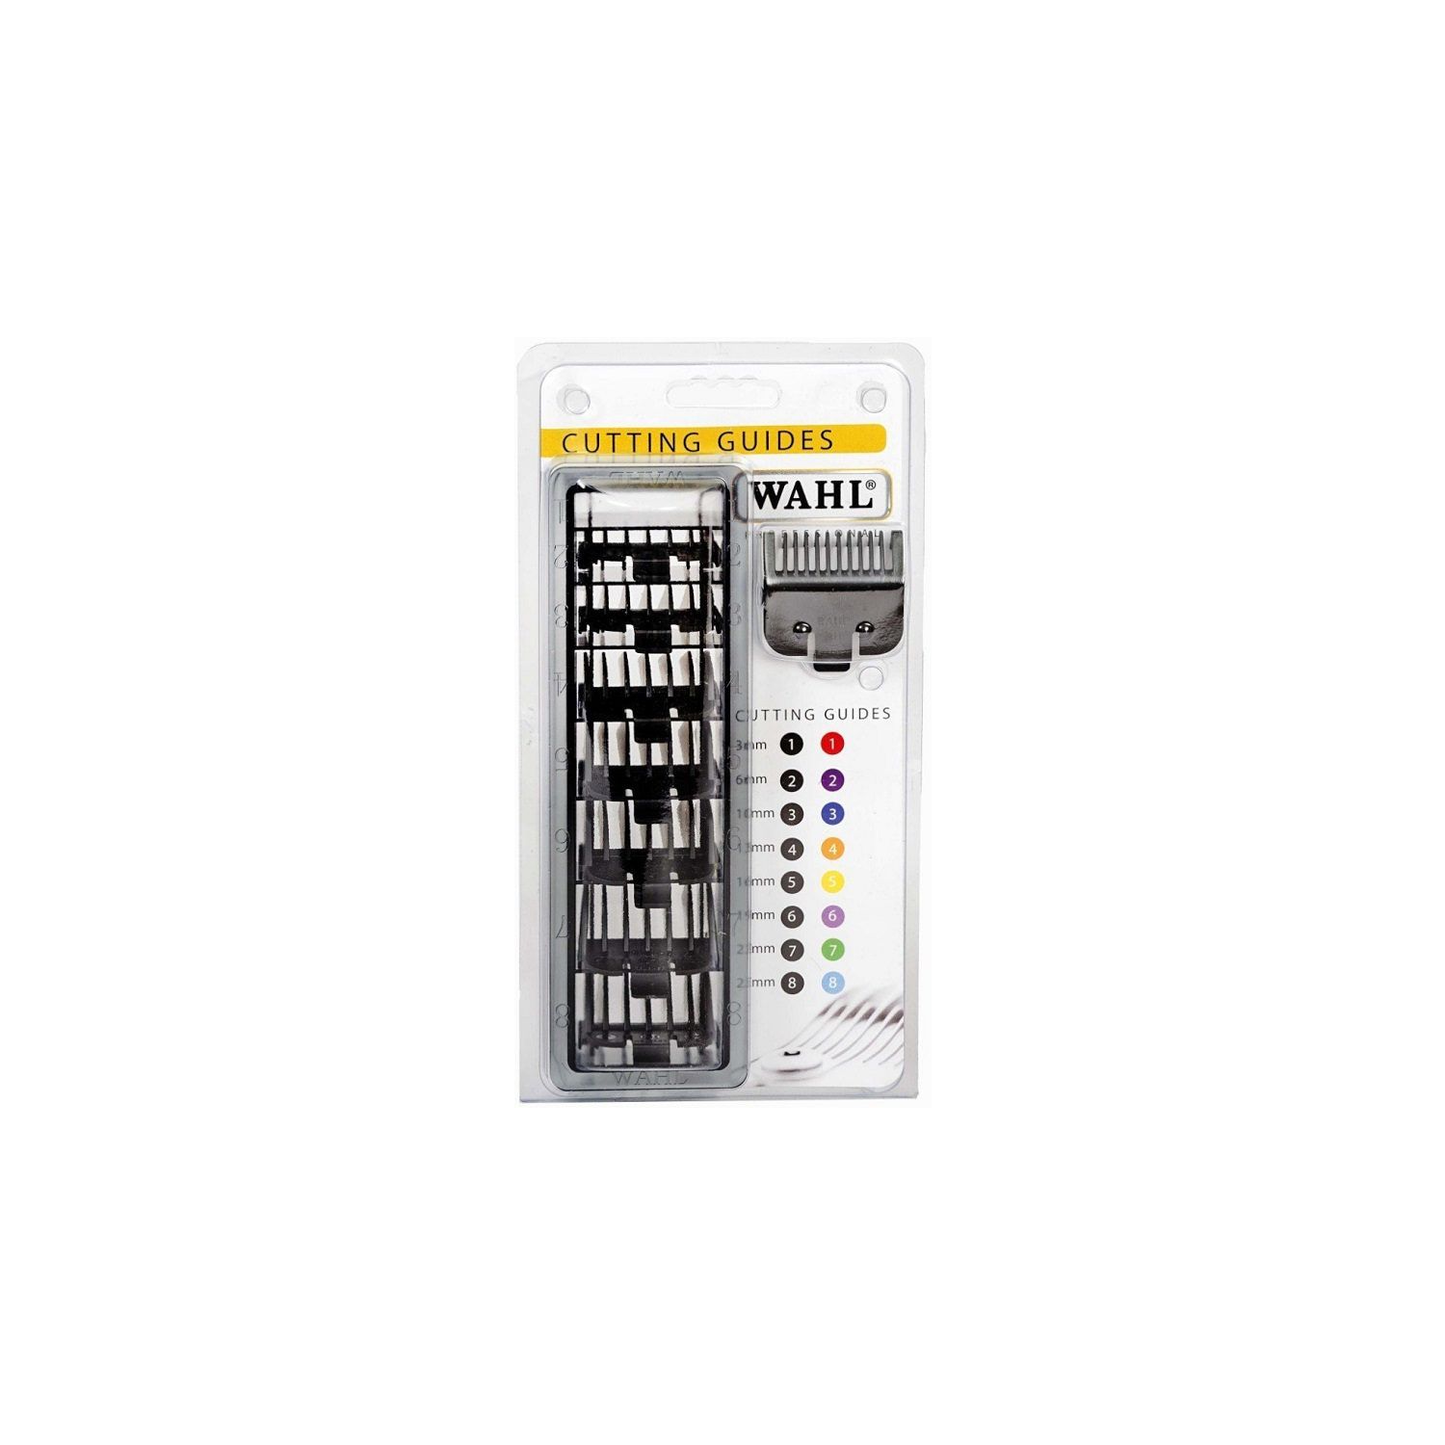 WAHL Black Cutting Guides Sizes 1-8